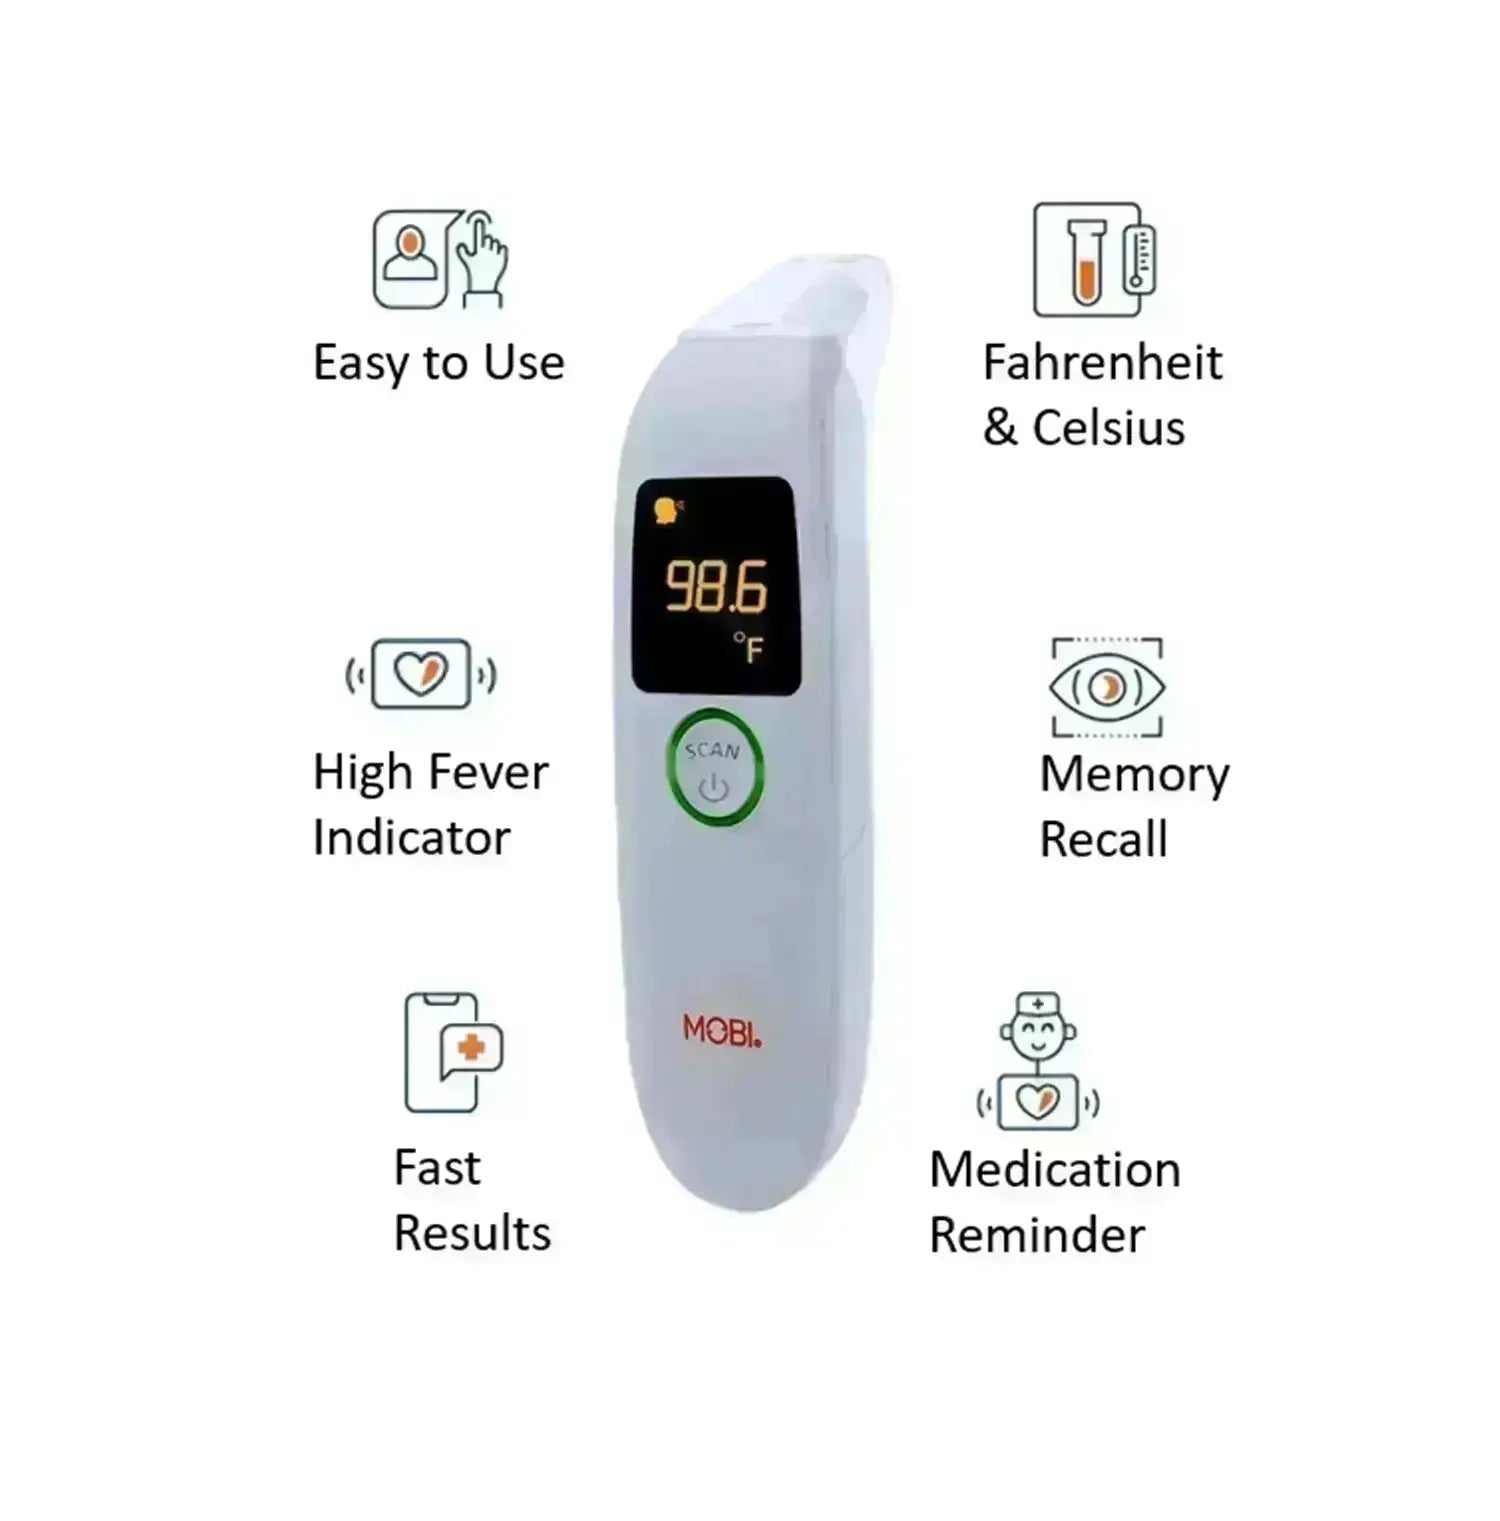 Mobi Ear & Forehead Thermometer, FeverTrack